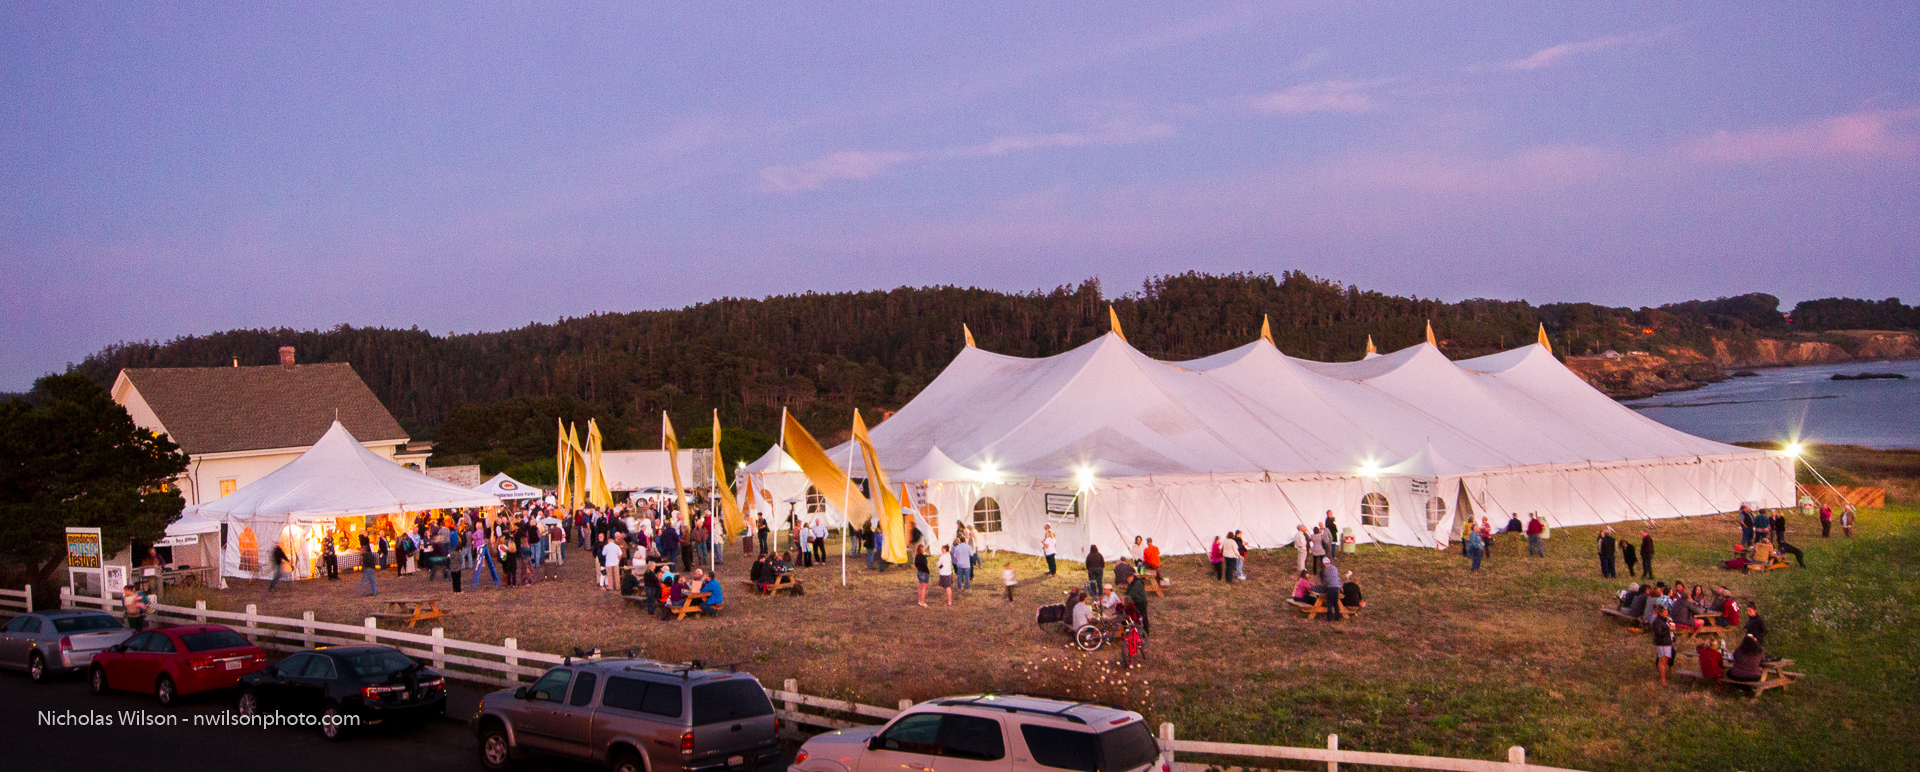 The MMF's 800 seat concert hall tent at twilight.